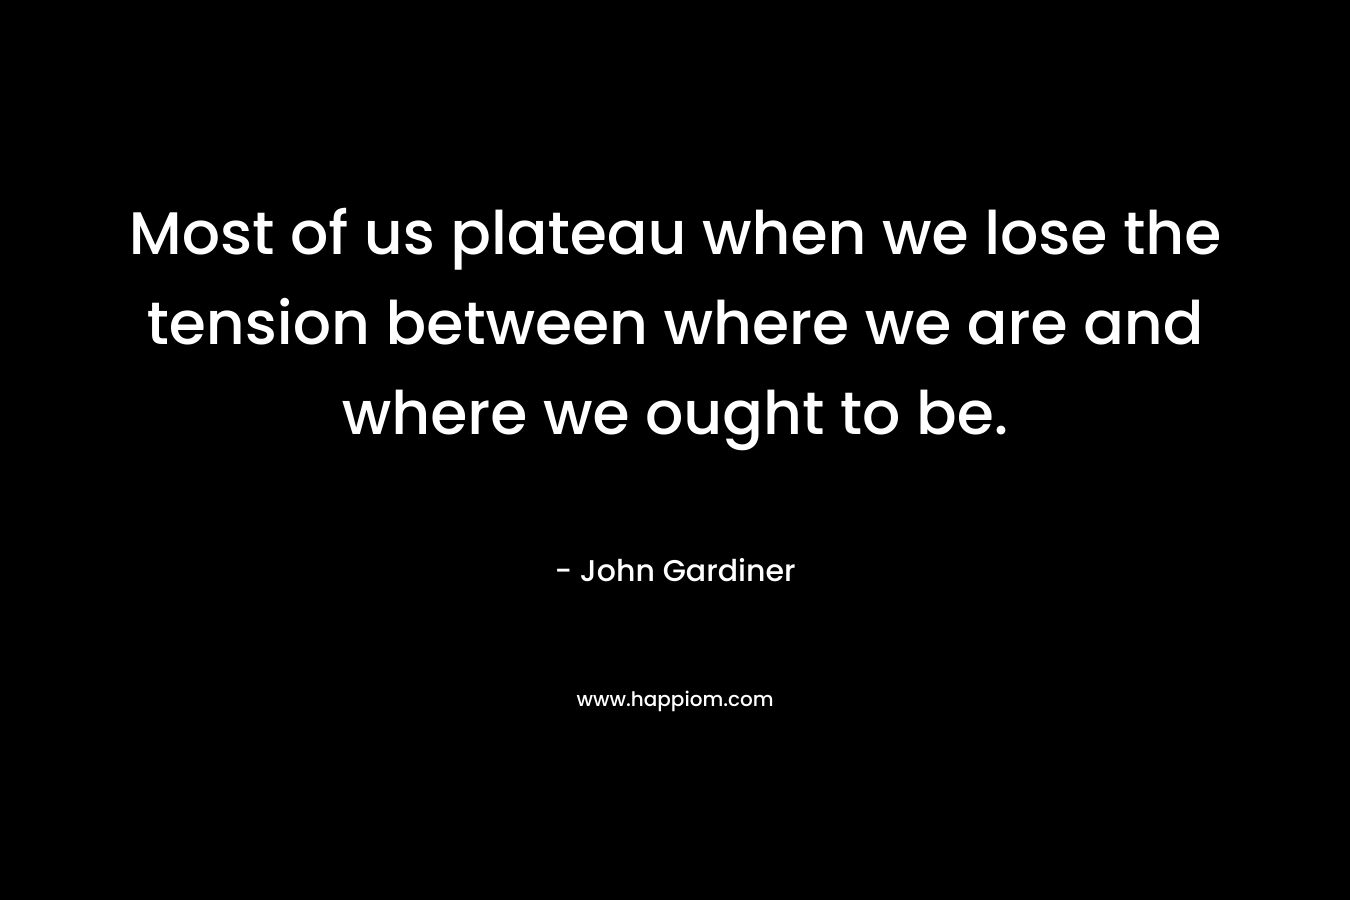 Most of us plateau when we lose the tension between where we are and where we ought to be. – John Gardiner